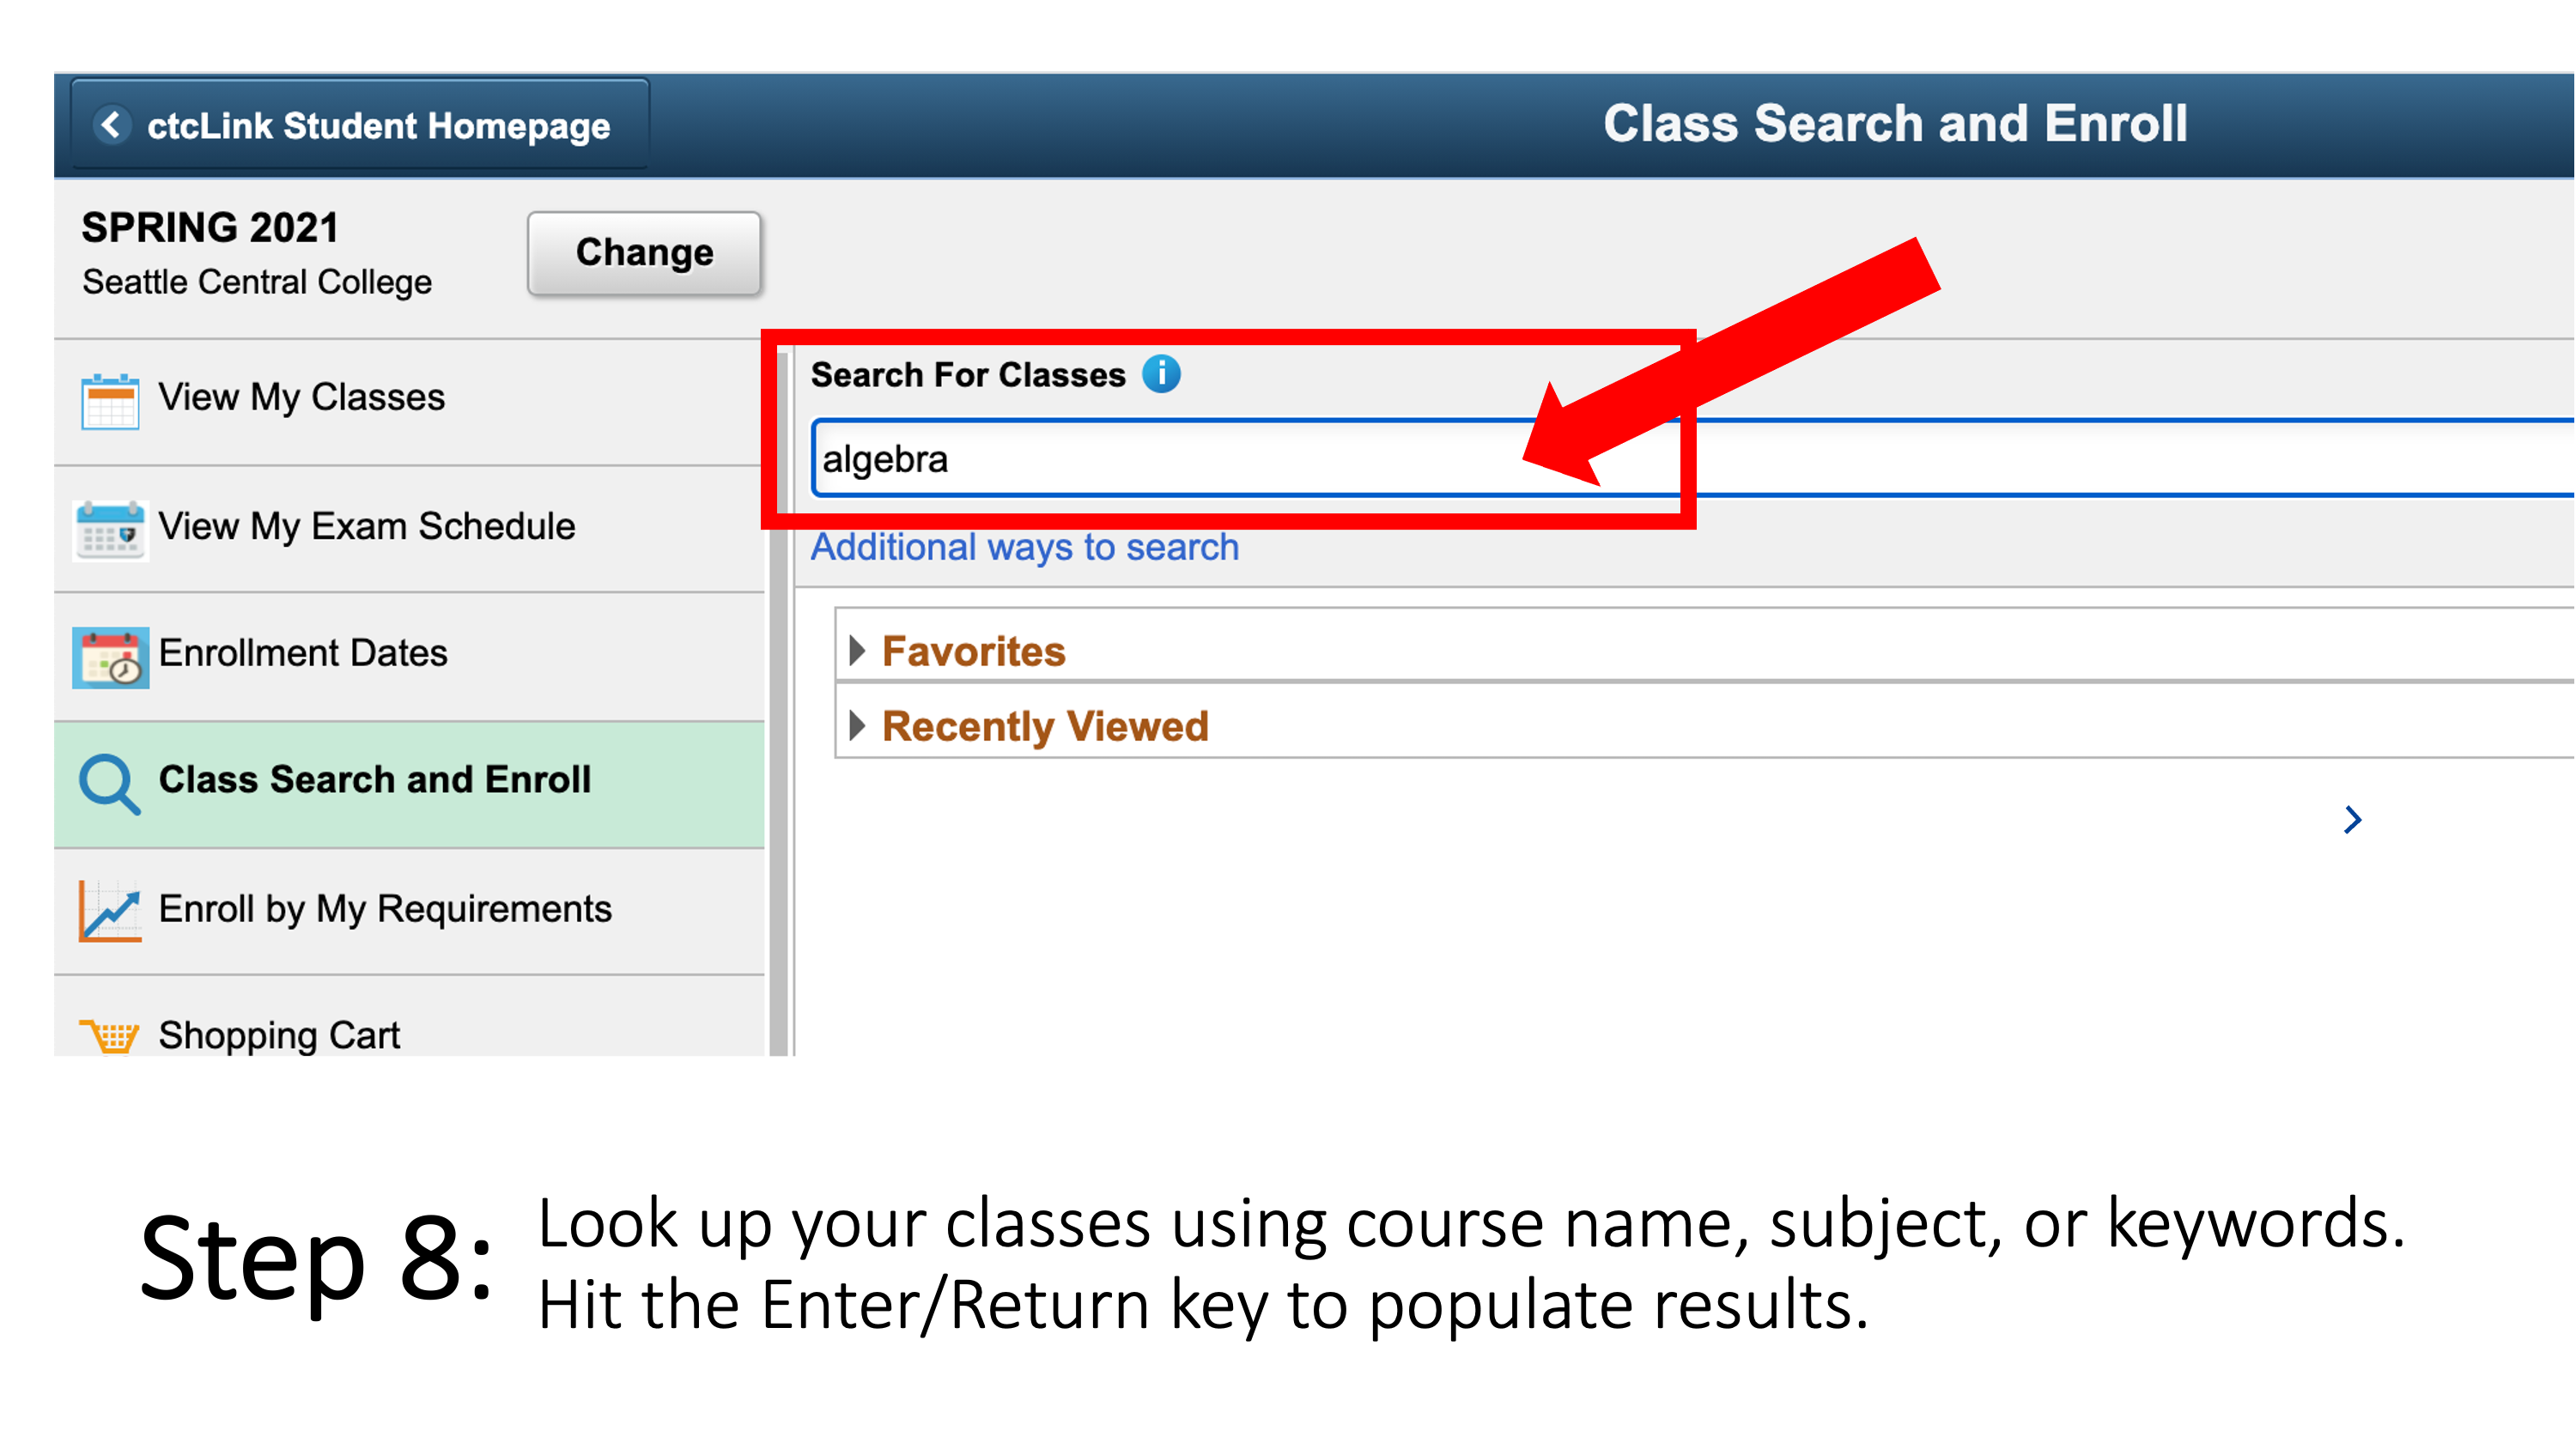 Look up your classes using course name, subject, or keywords. Hit the Enter/Return key to populate results.